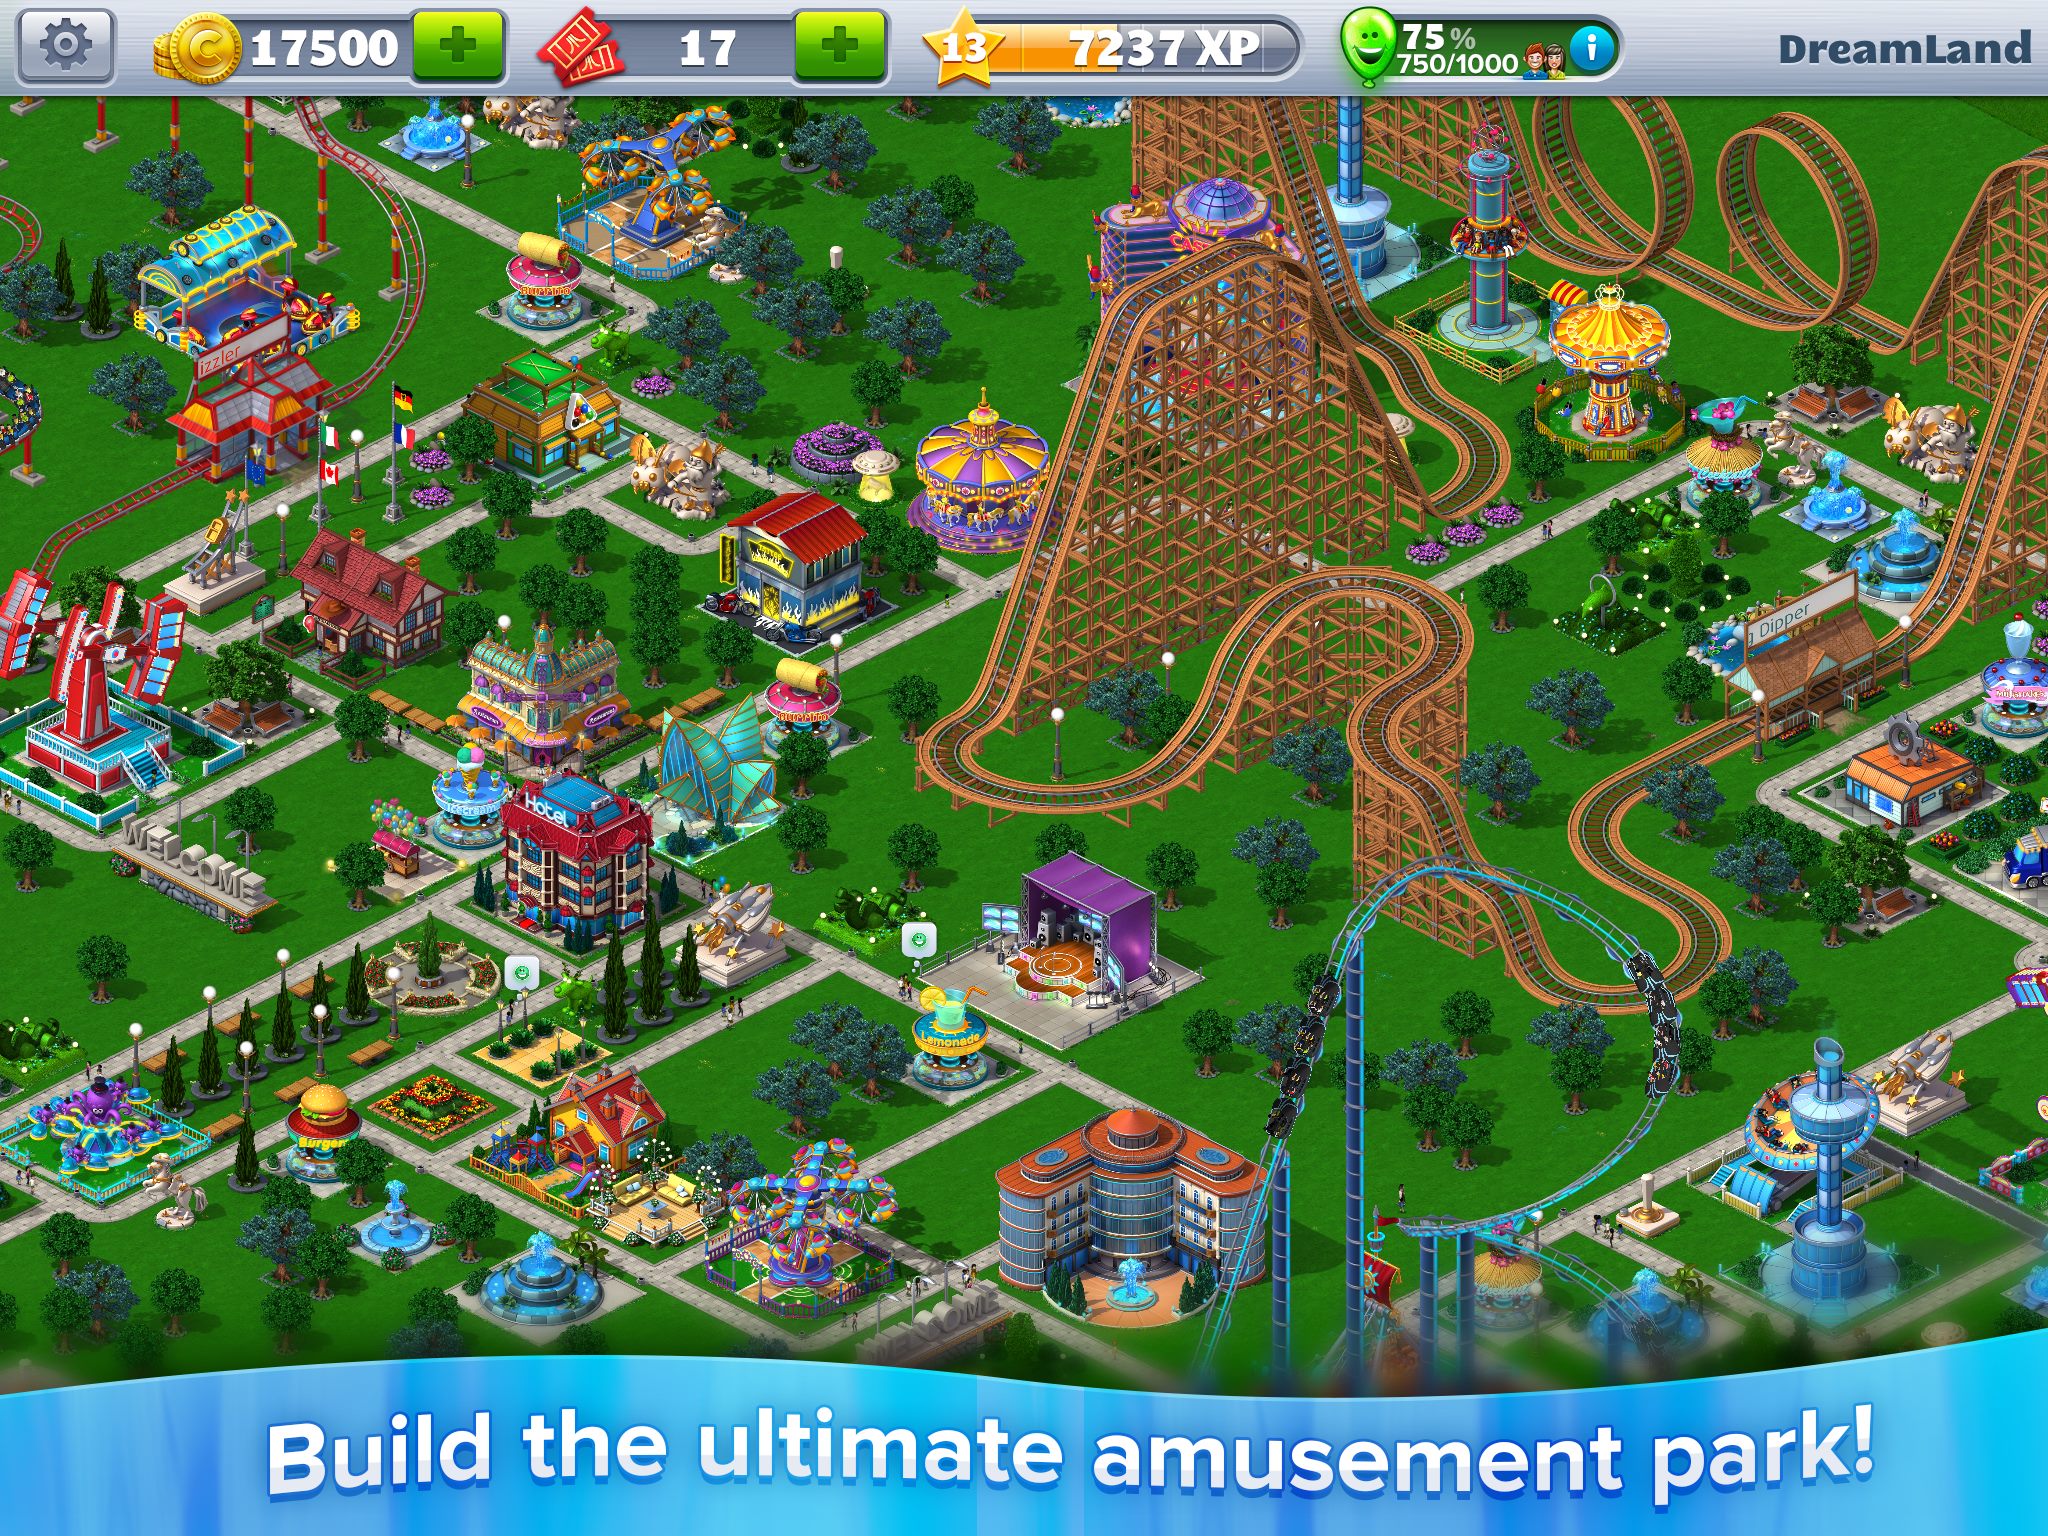 RollerCoaster Tycoon 4 Mobile Trailer